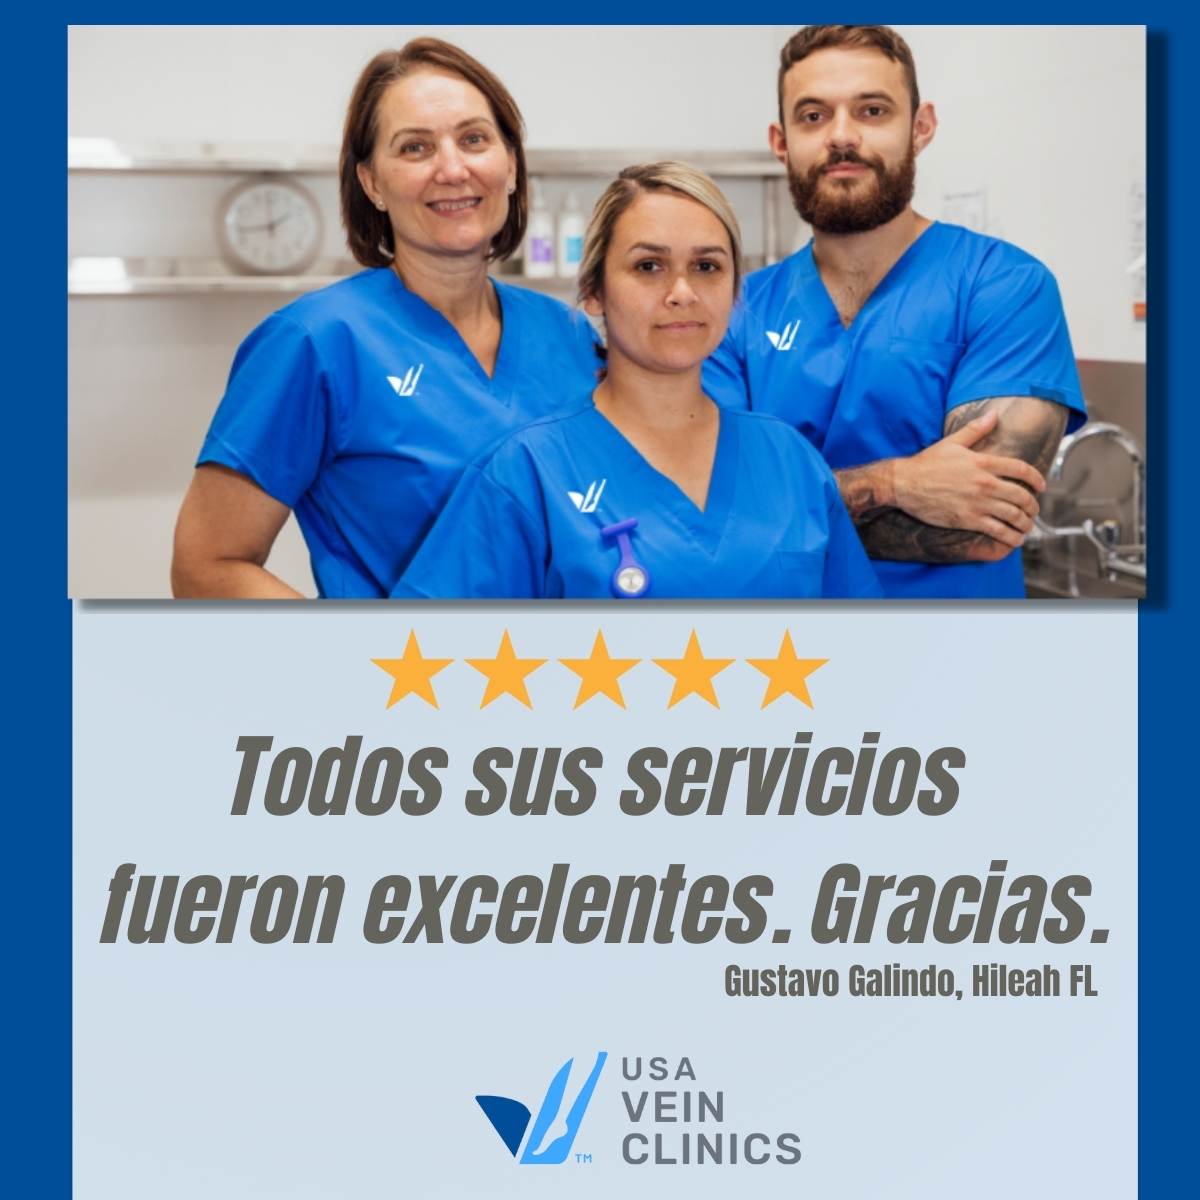 Our Hialeah vein clinic staff has a patient first philosophy